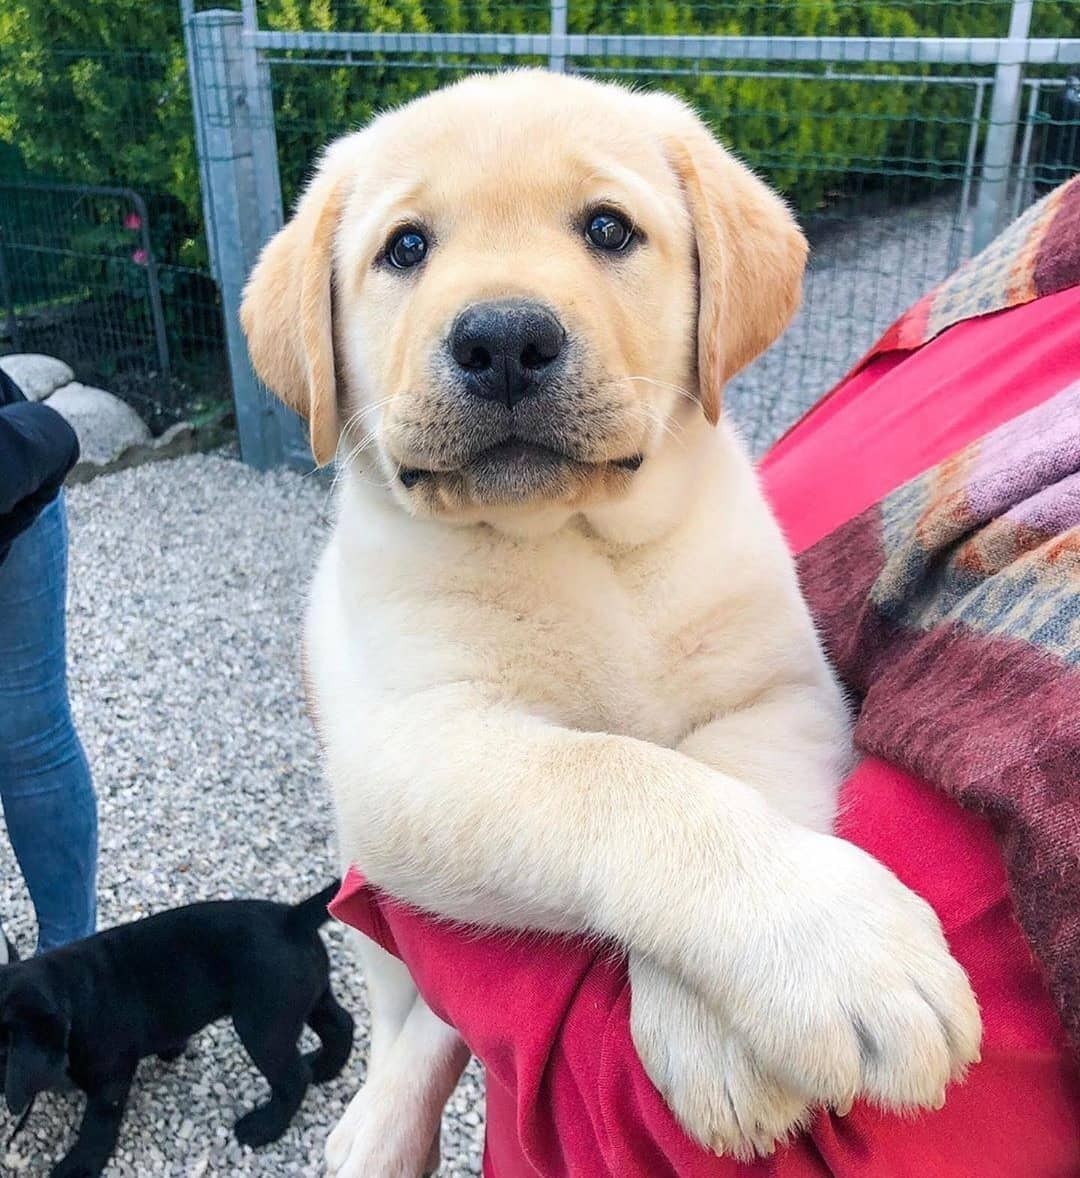 Purebred Labrador puppies for one month old for sale